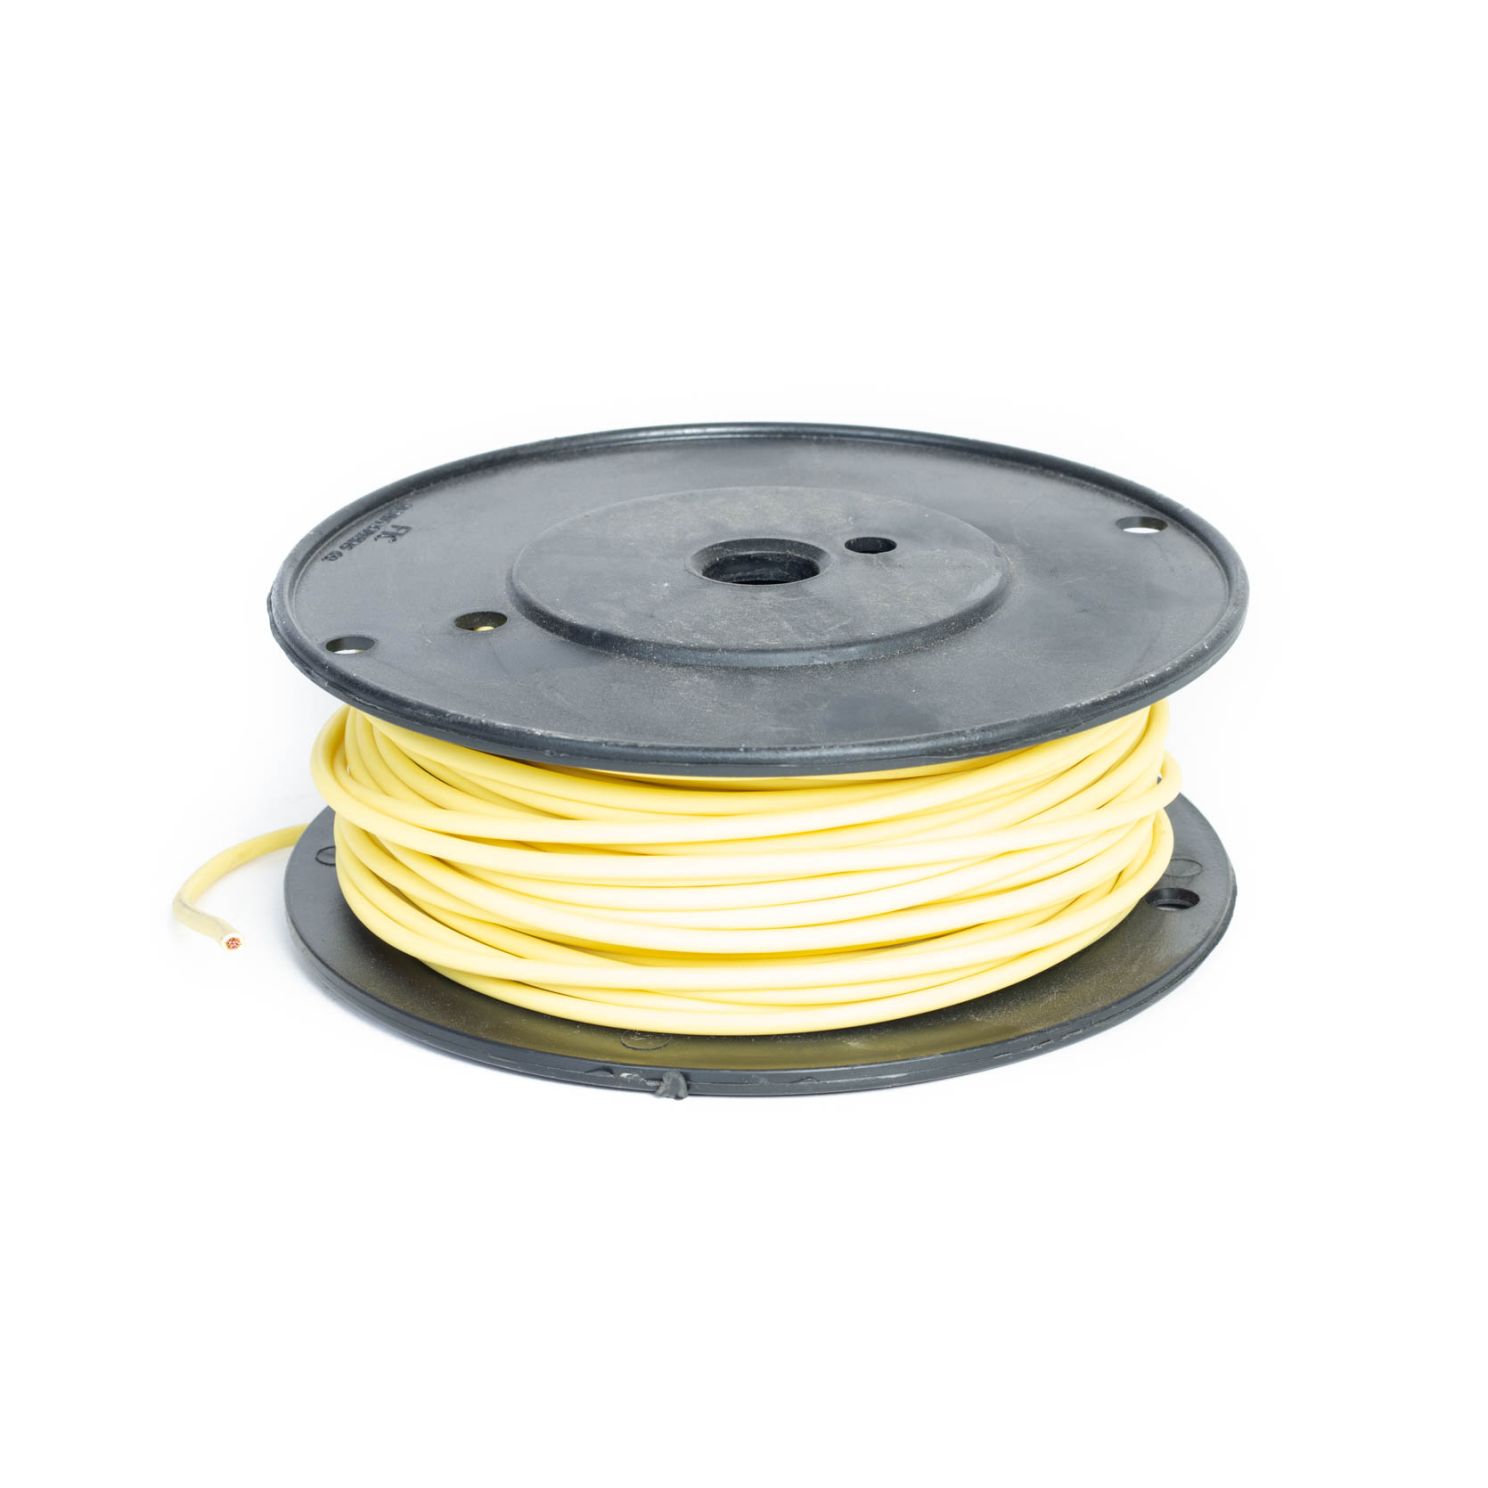 GXL12-4 Primary Yellow Conductor Wire 12-Gauge